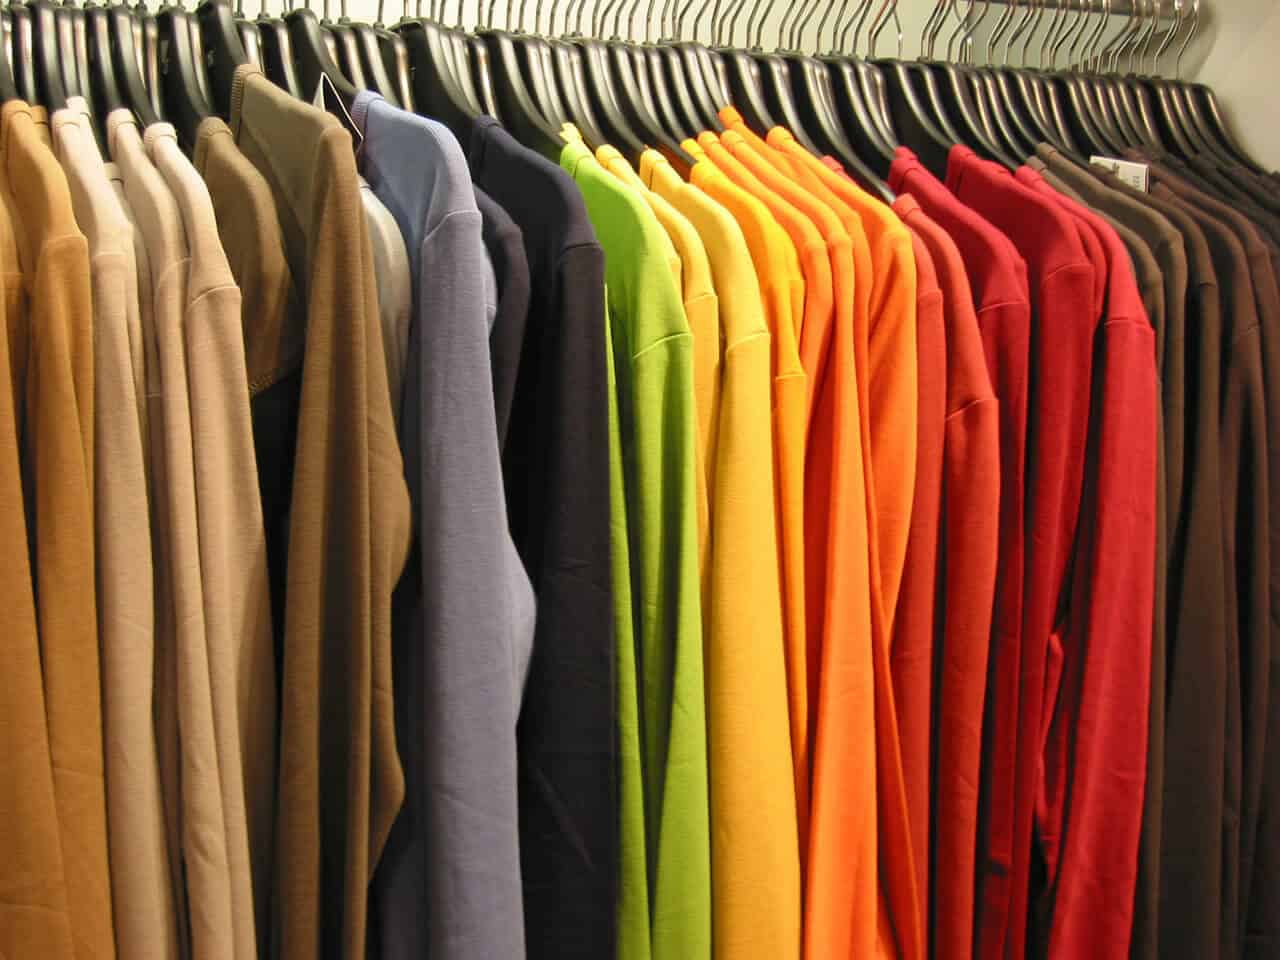 Organize your clothes by category and color, from light to dark